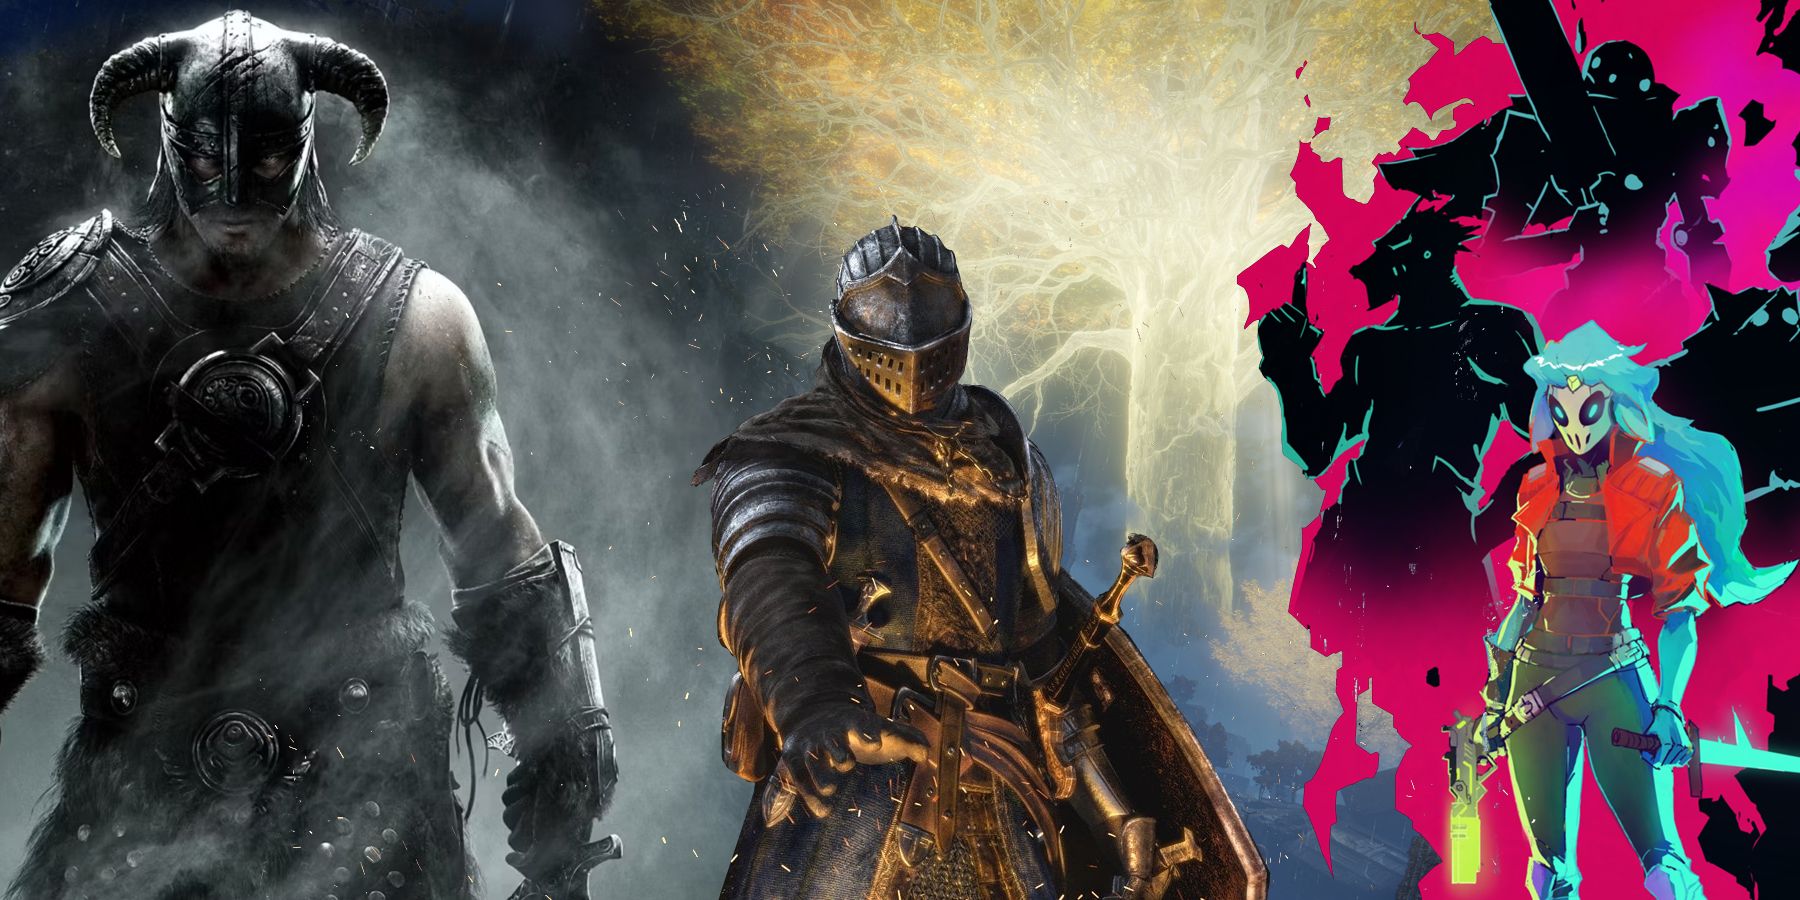 Best Games To Play If You Enjoyed Dragon's Dogma